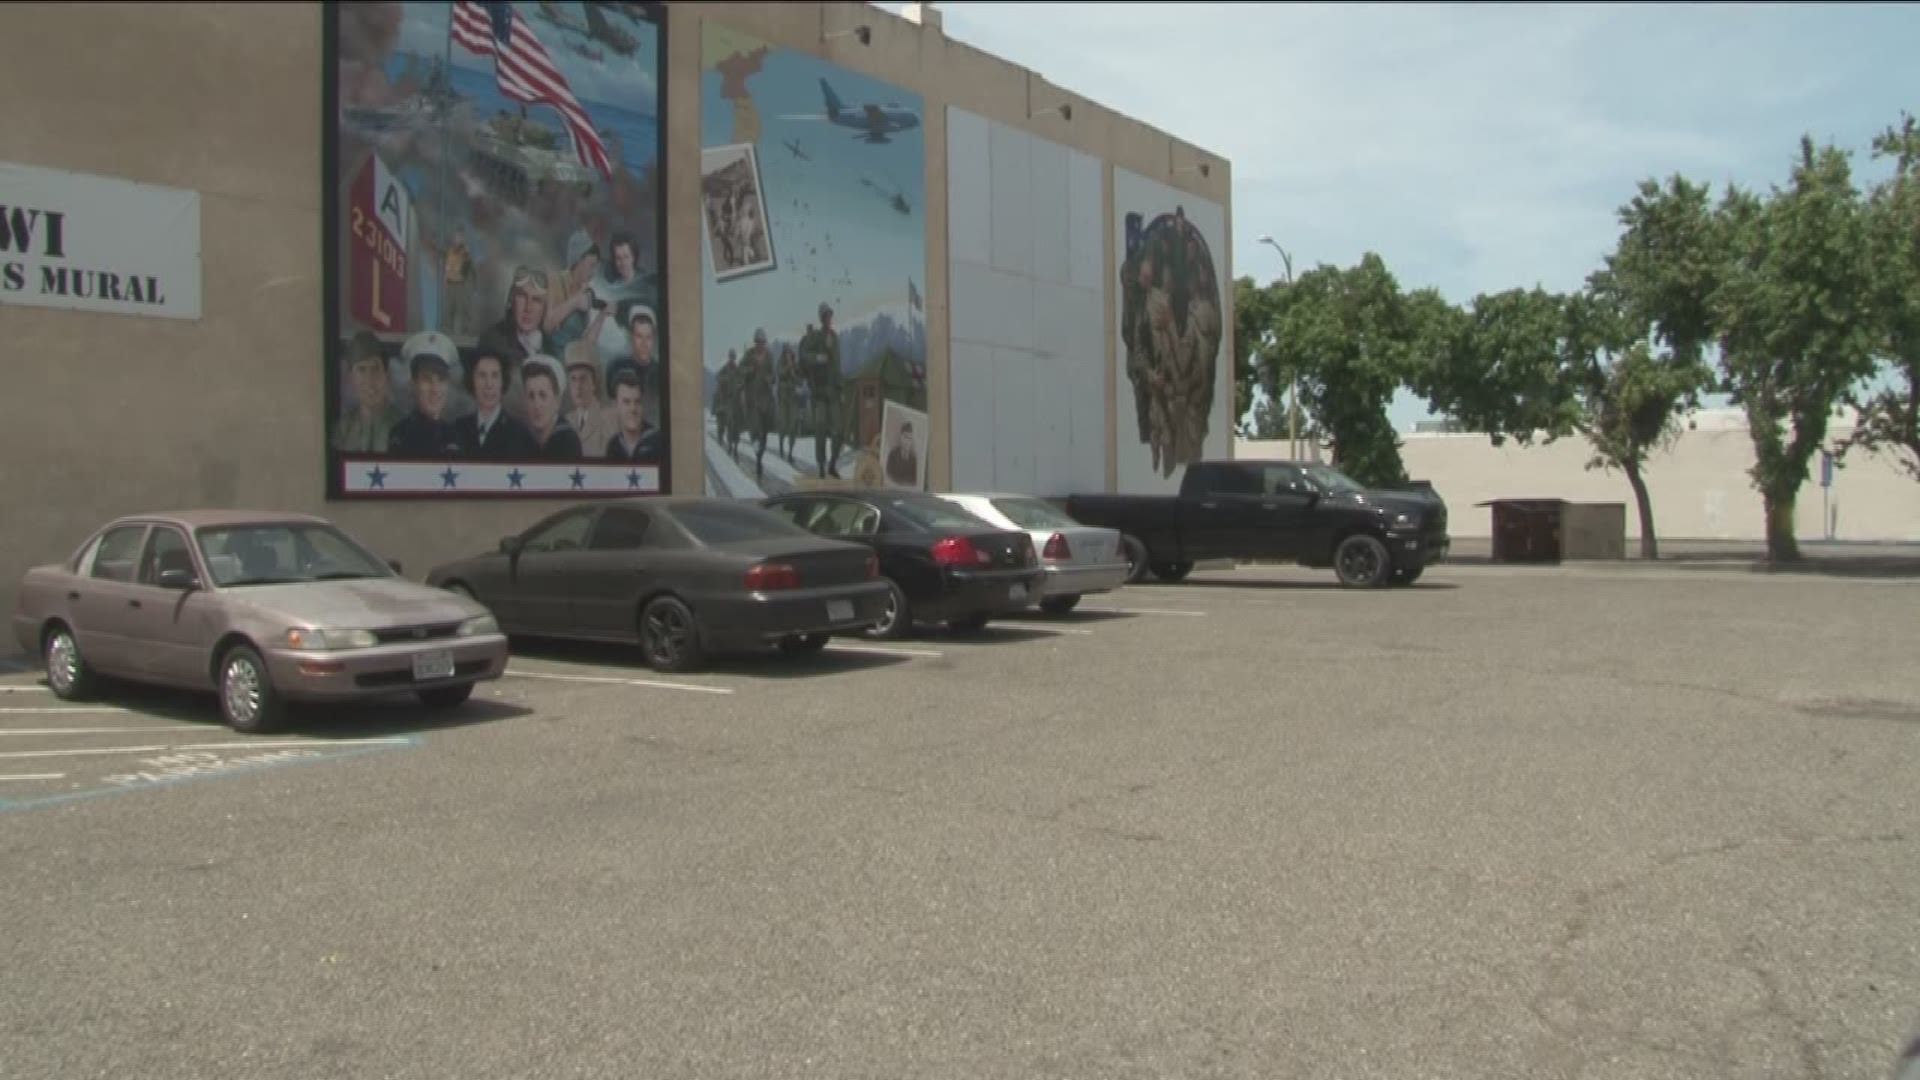 Vietnam mural nears completion in Manteca. (May 10, 2017)